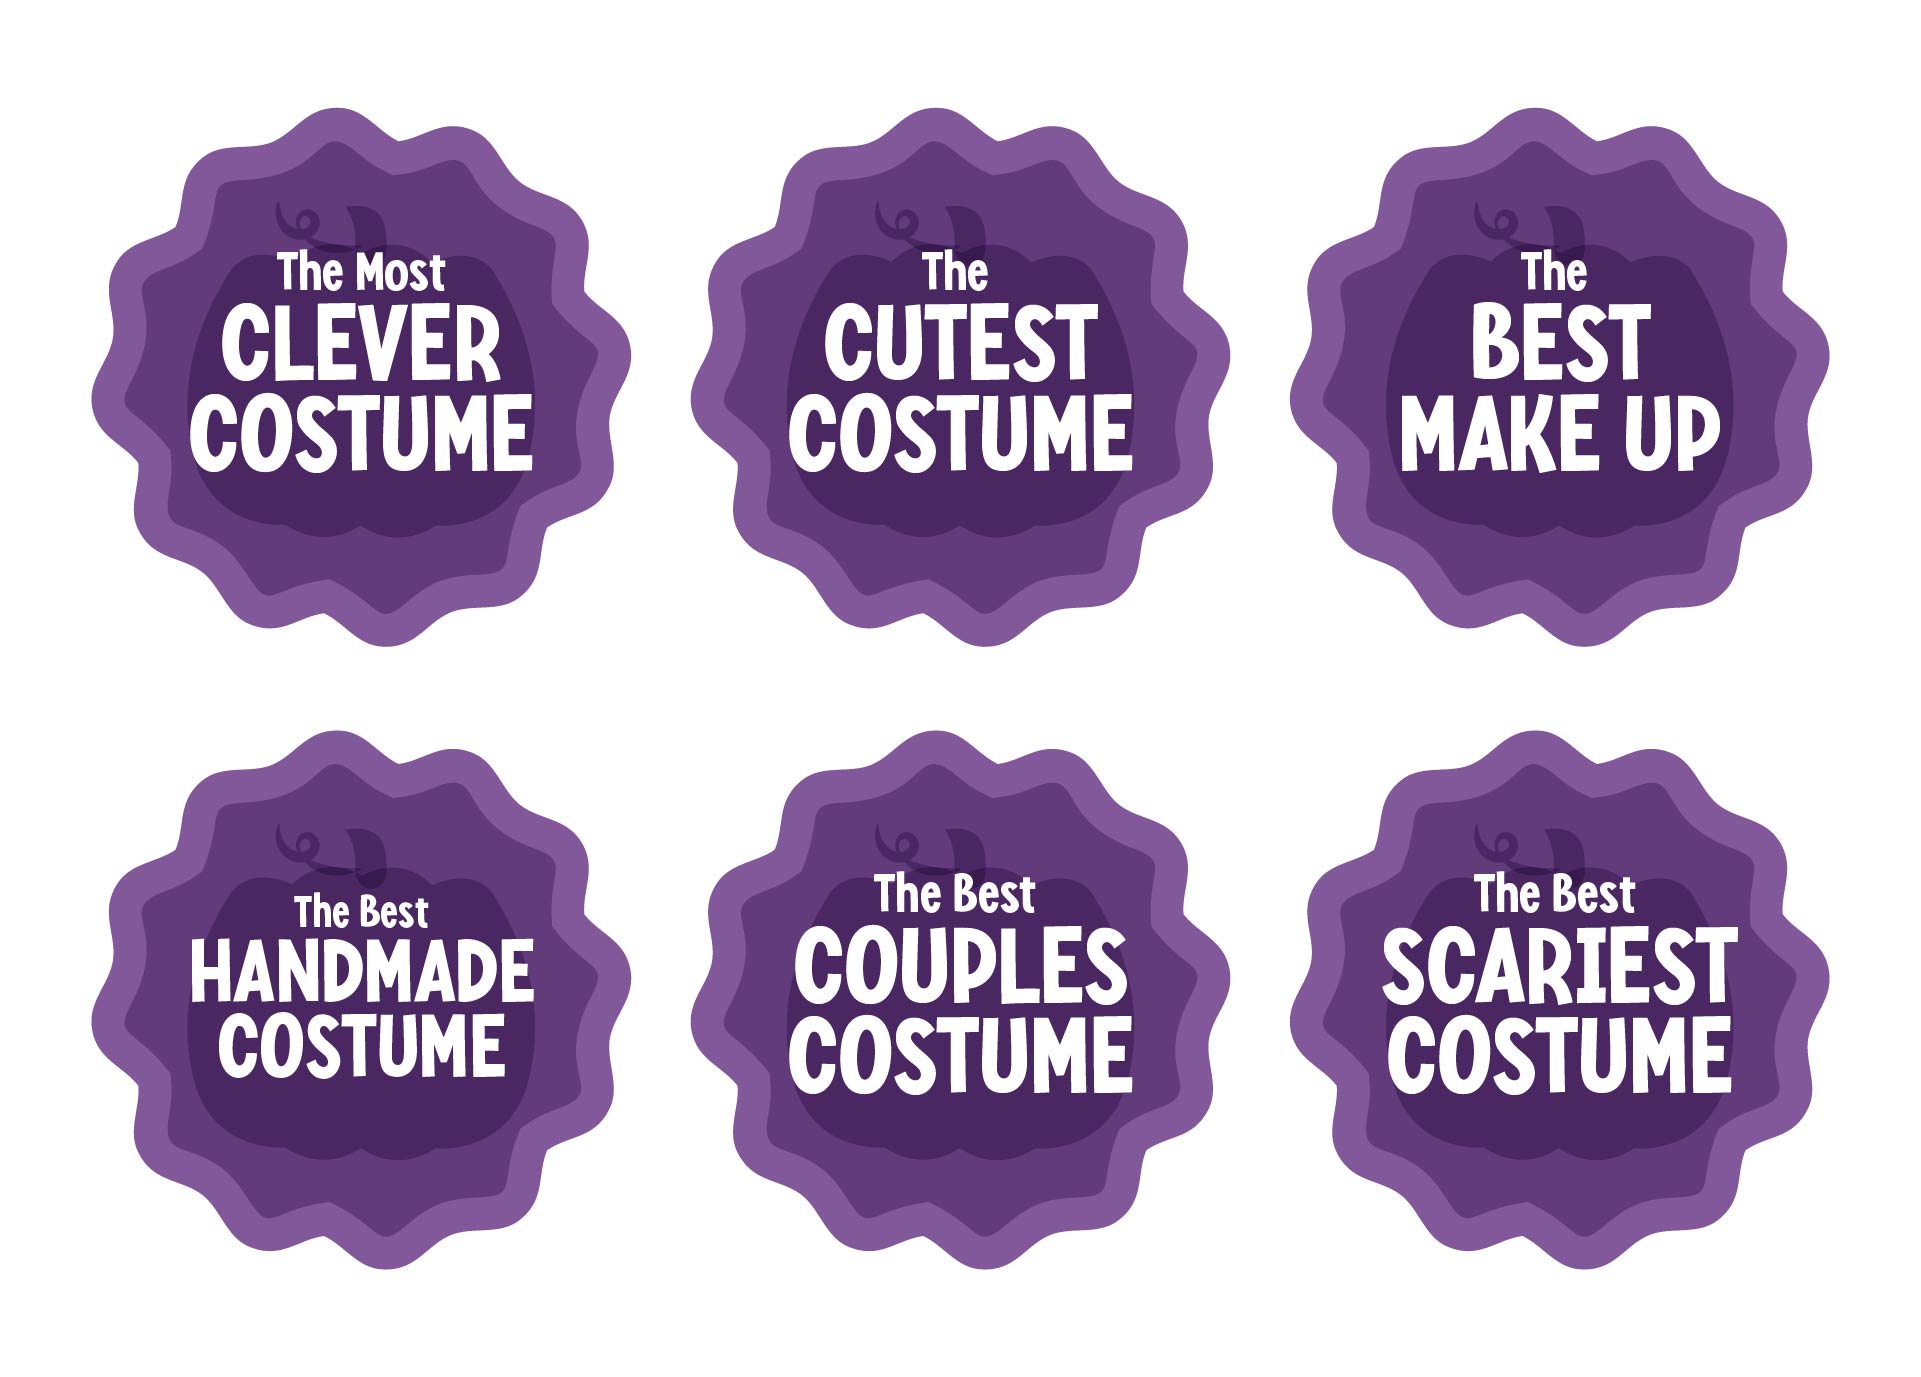 Printable Halloween Costume Contest Prize Ribbons